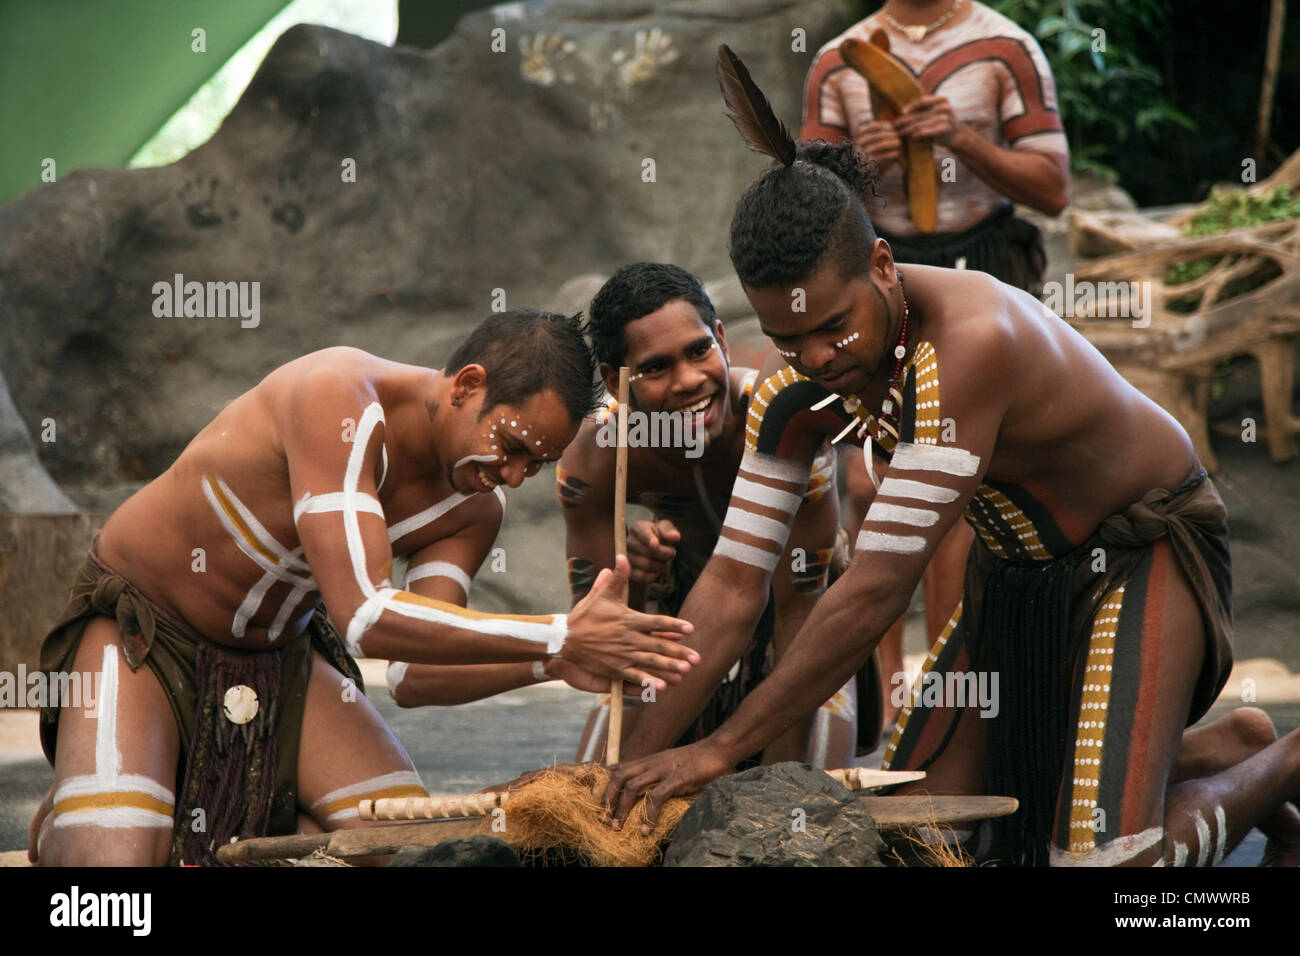 Indigenous performers using traditional methods to make fire.  Cairns, Queensland, Australia Stock Photo